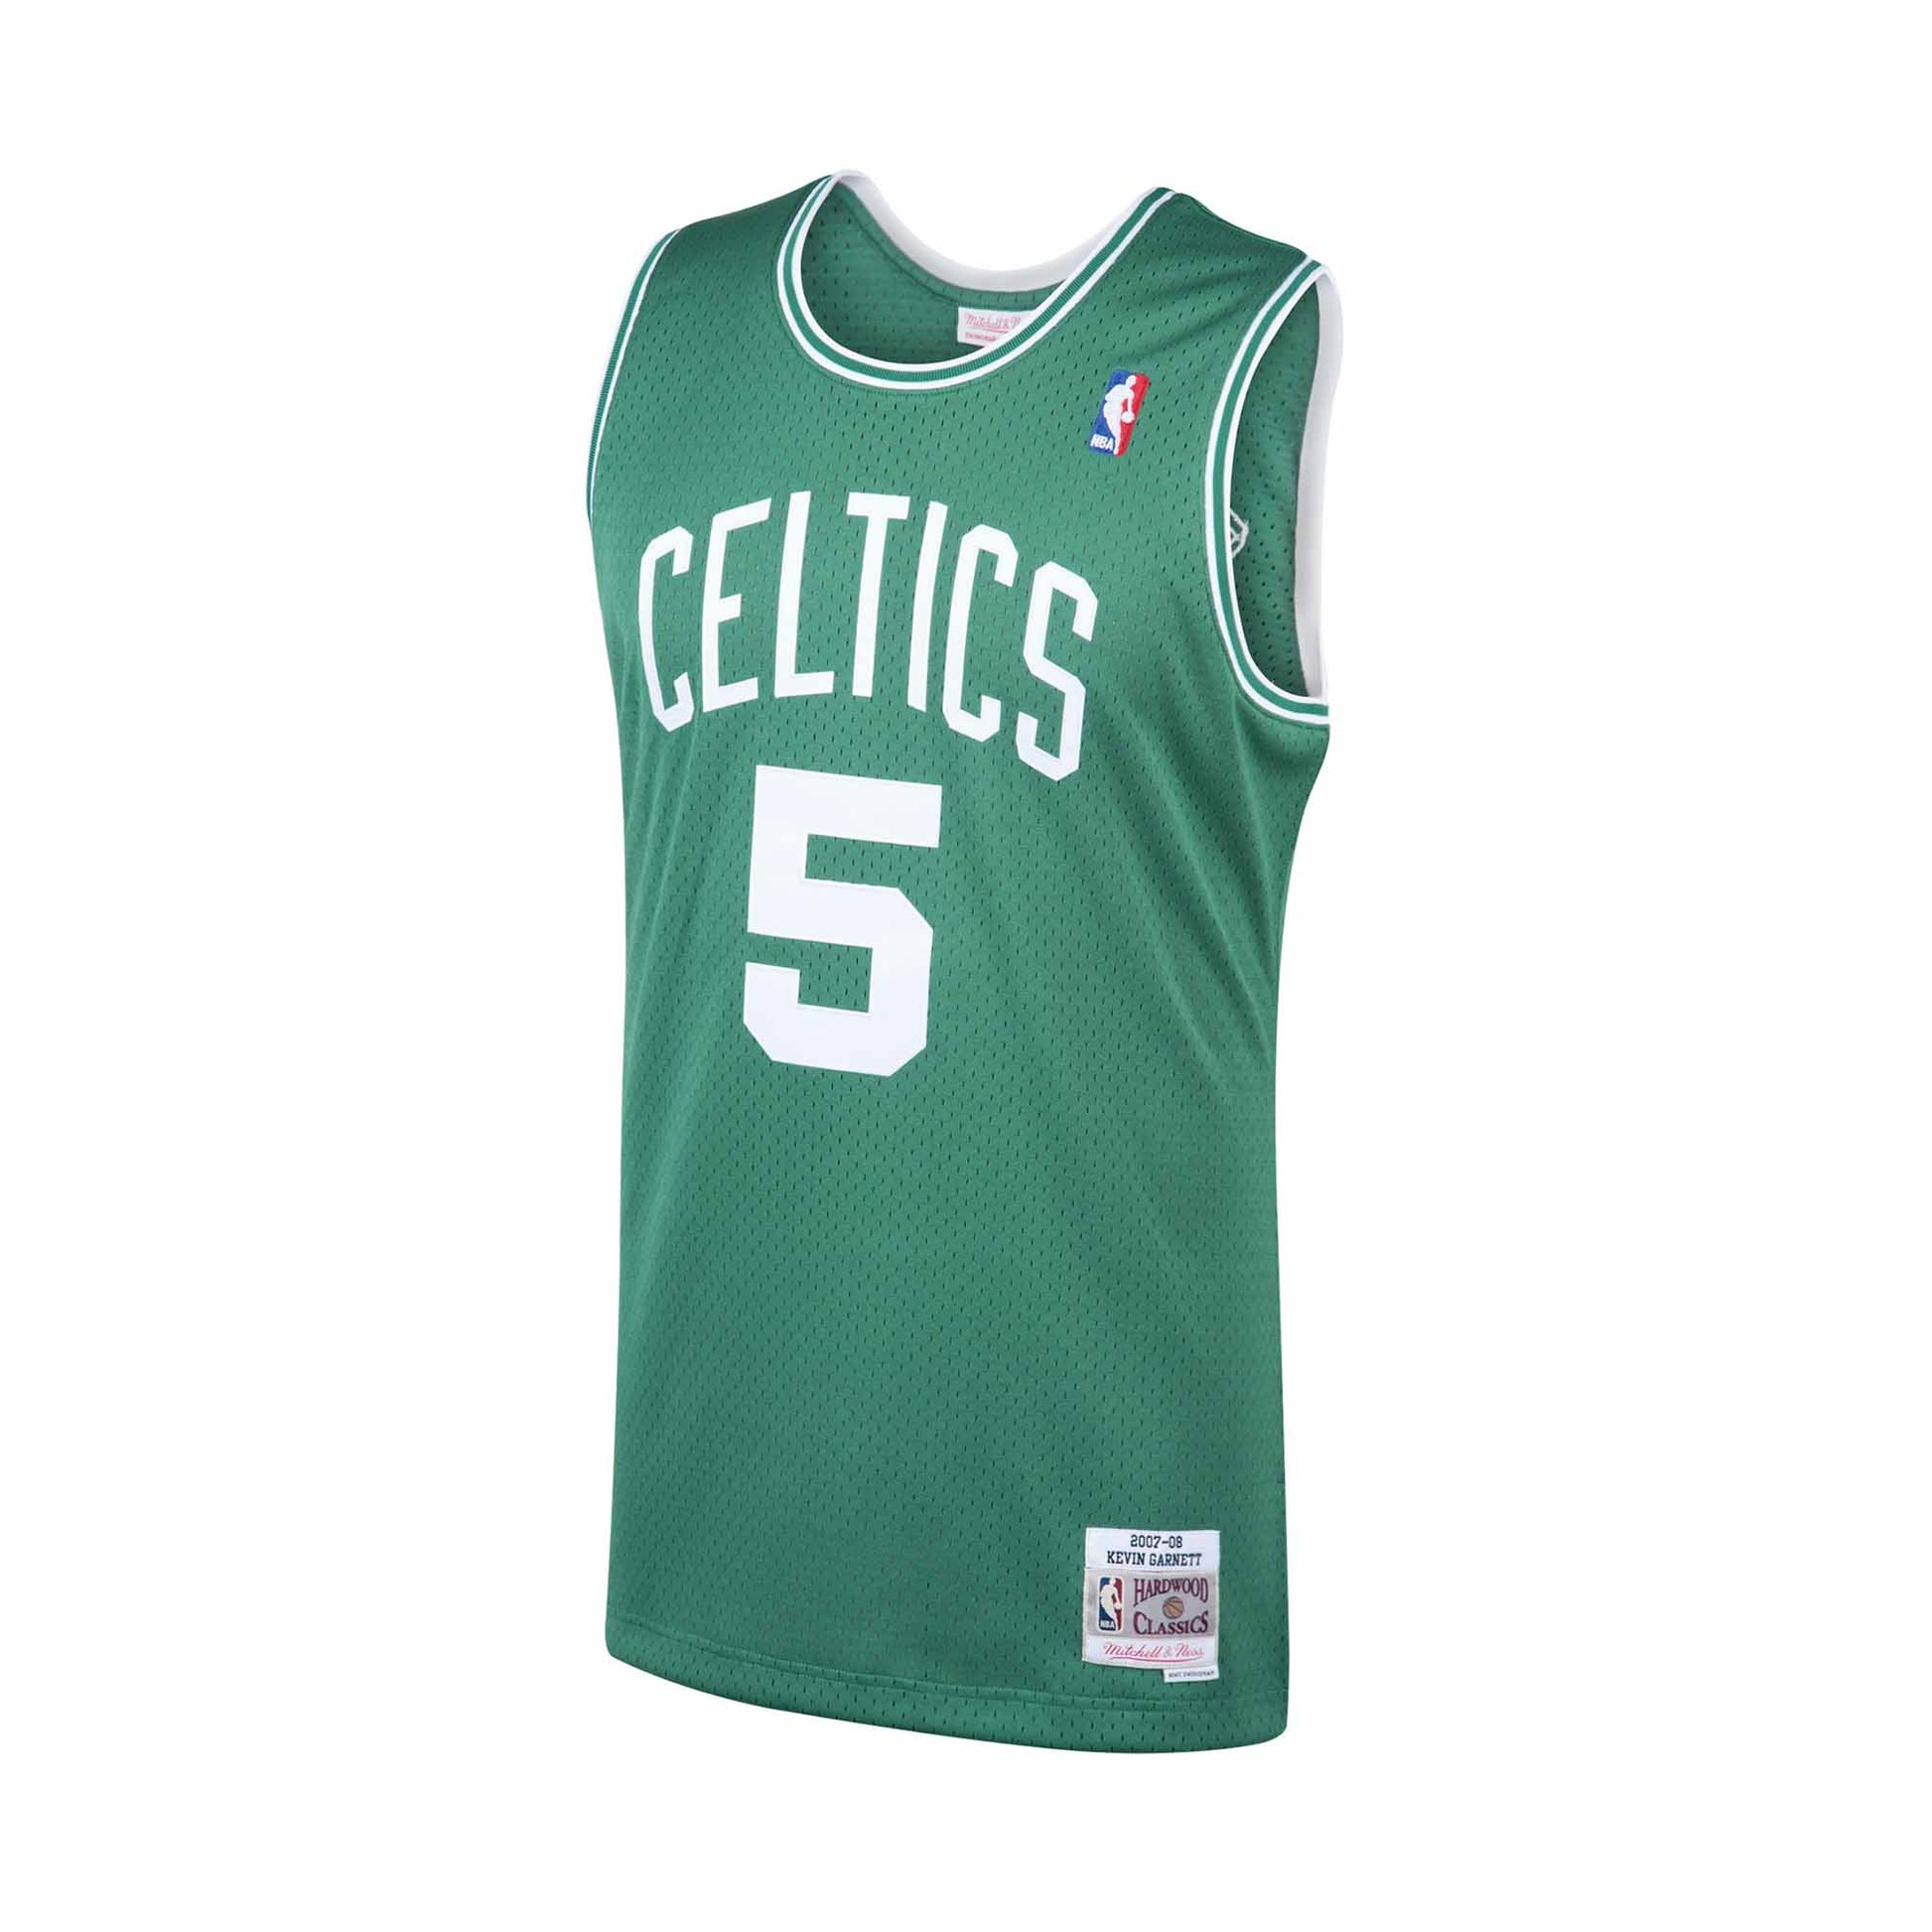 Adidas Throwback Boston Kevin Garnett Jersey for Sale in North